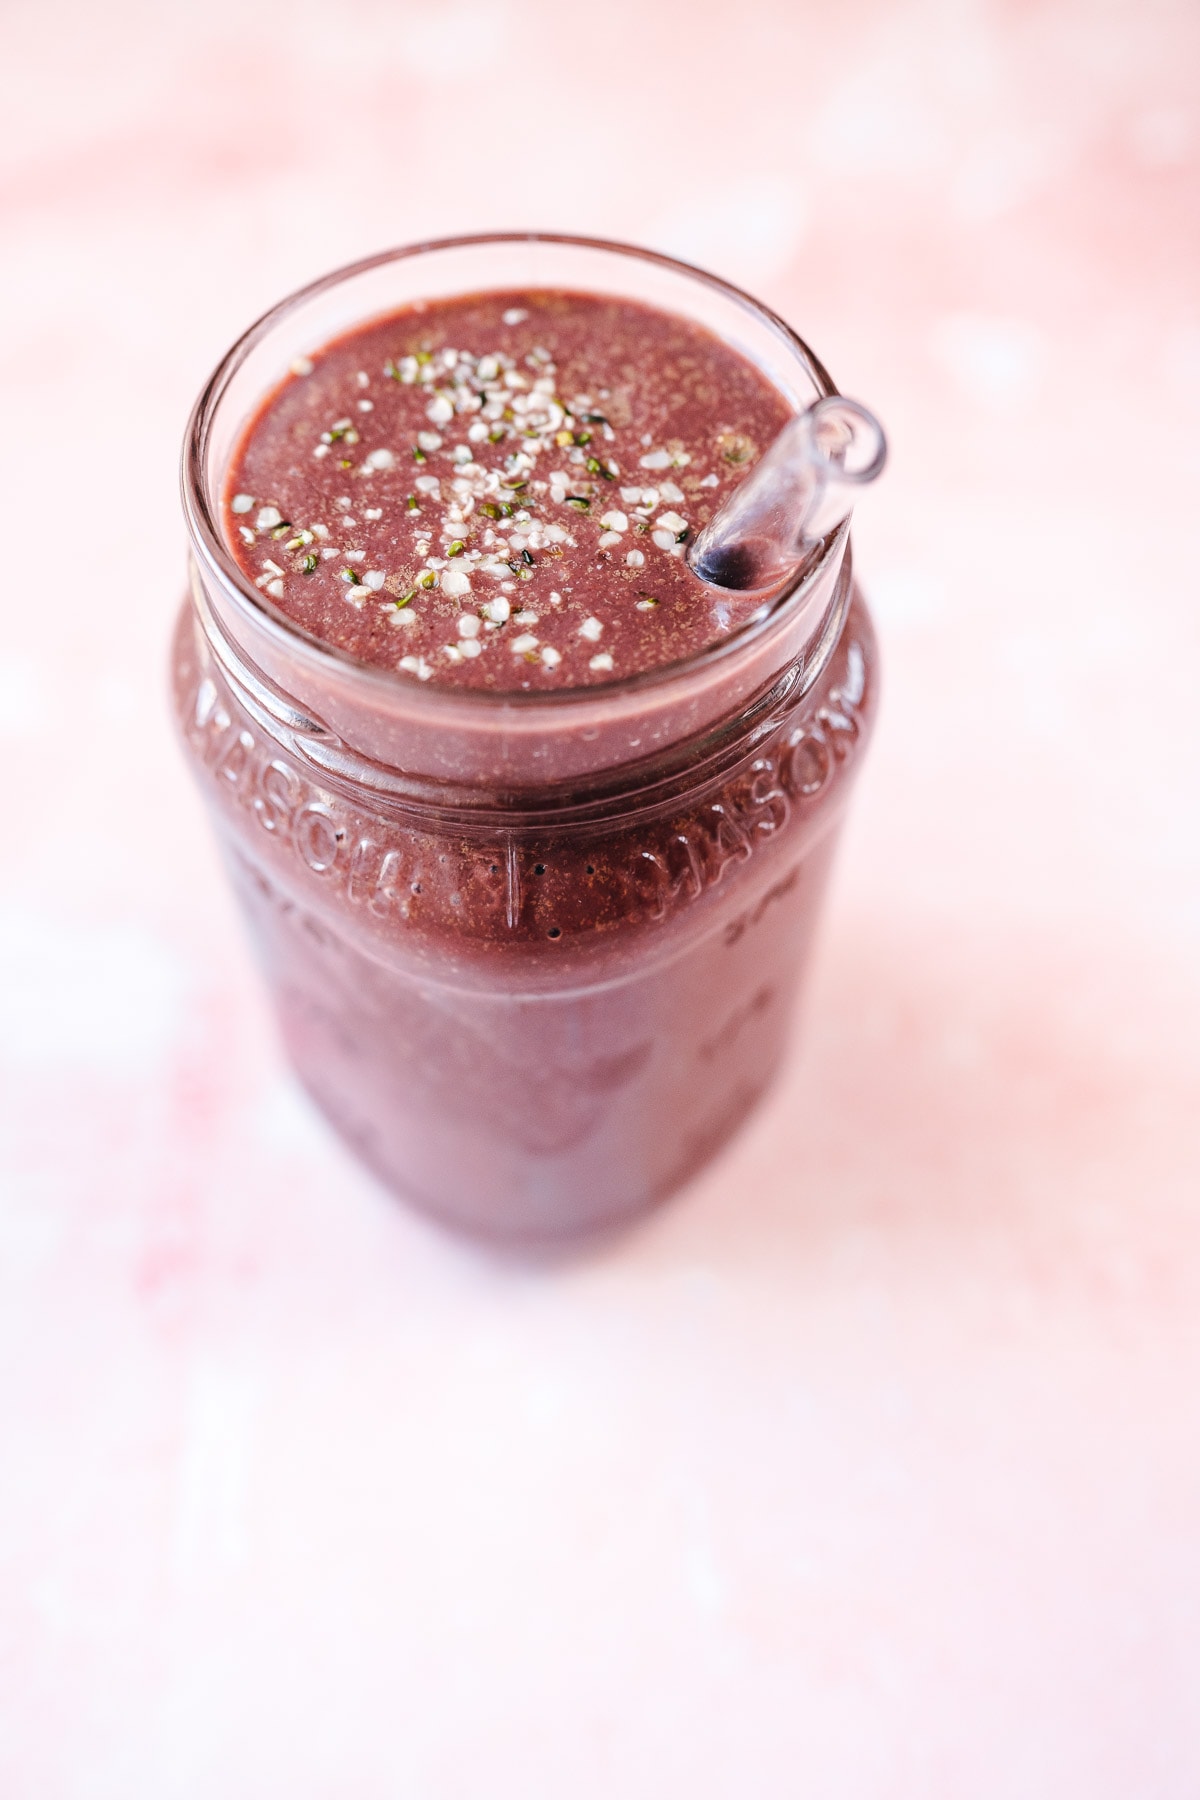 Close shot of a purple smoothie in a glass jar sprinkled with white seeds.